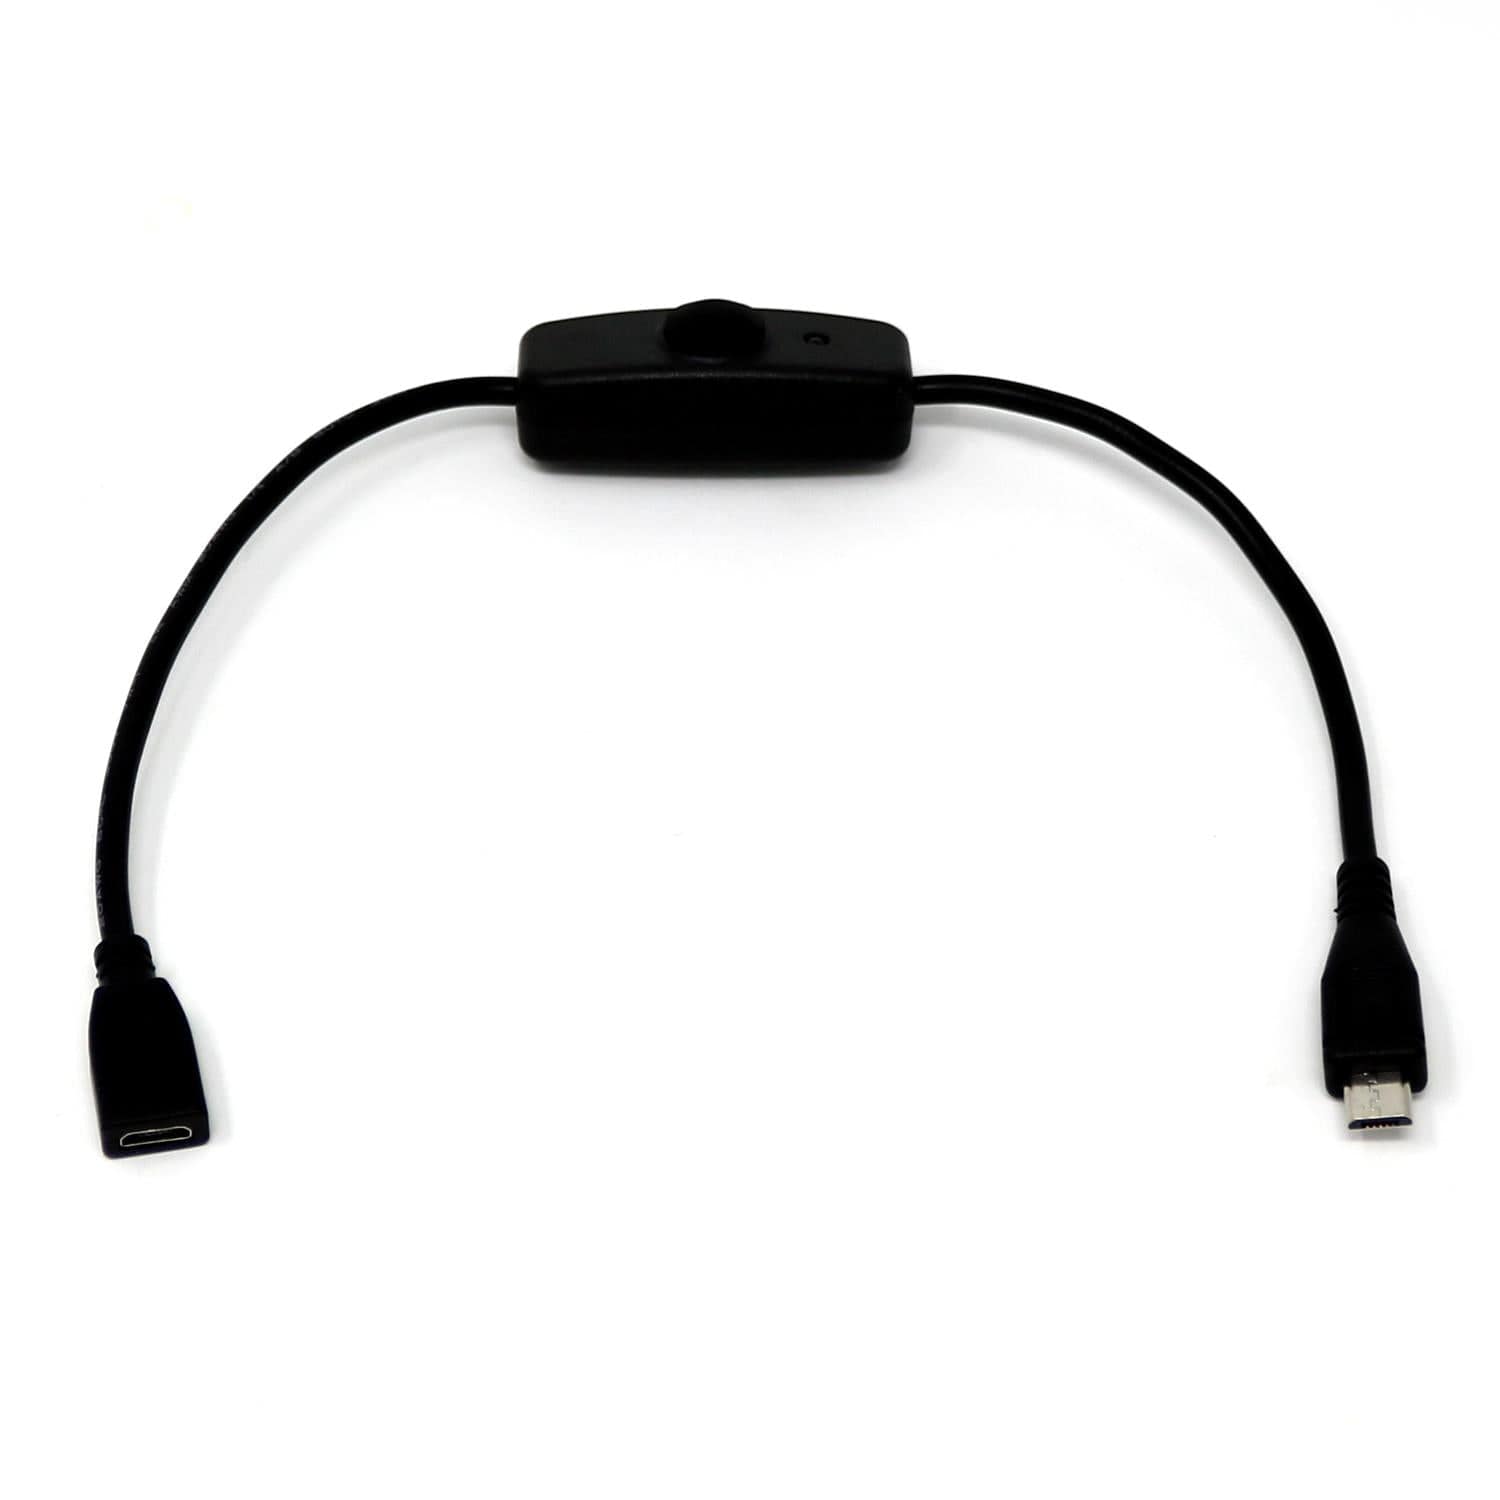 Micro-USB Cable with On/Off Switch - The Pi Hut